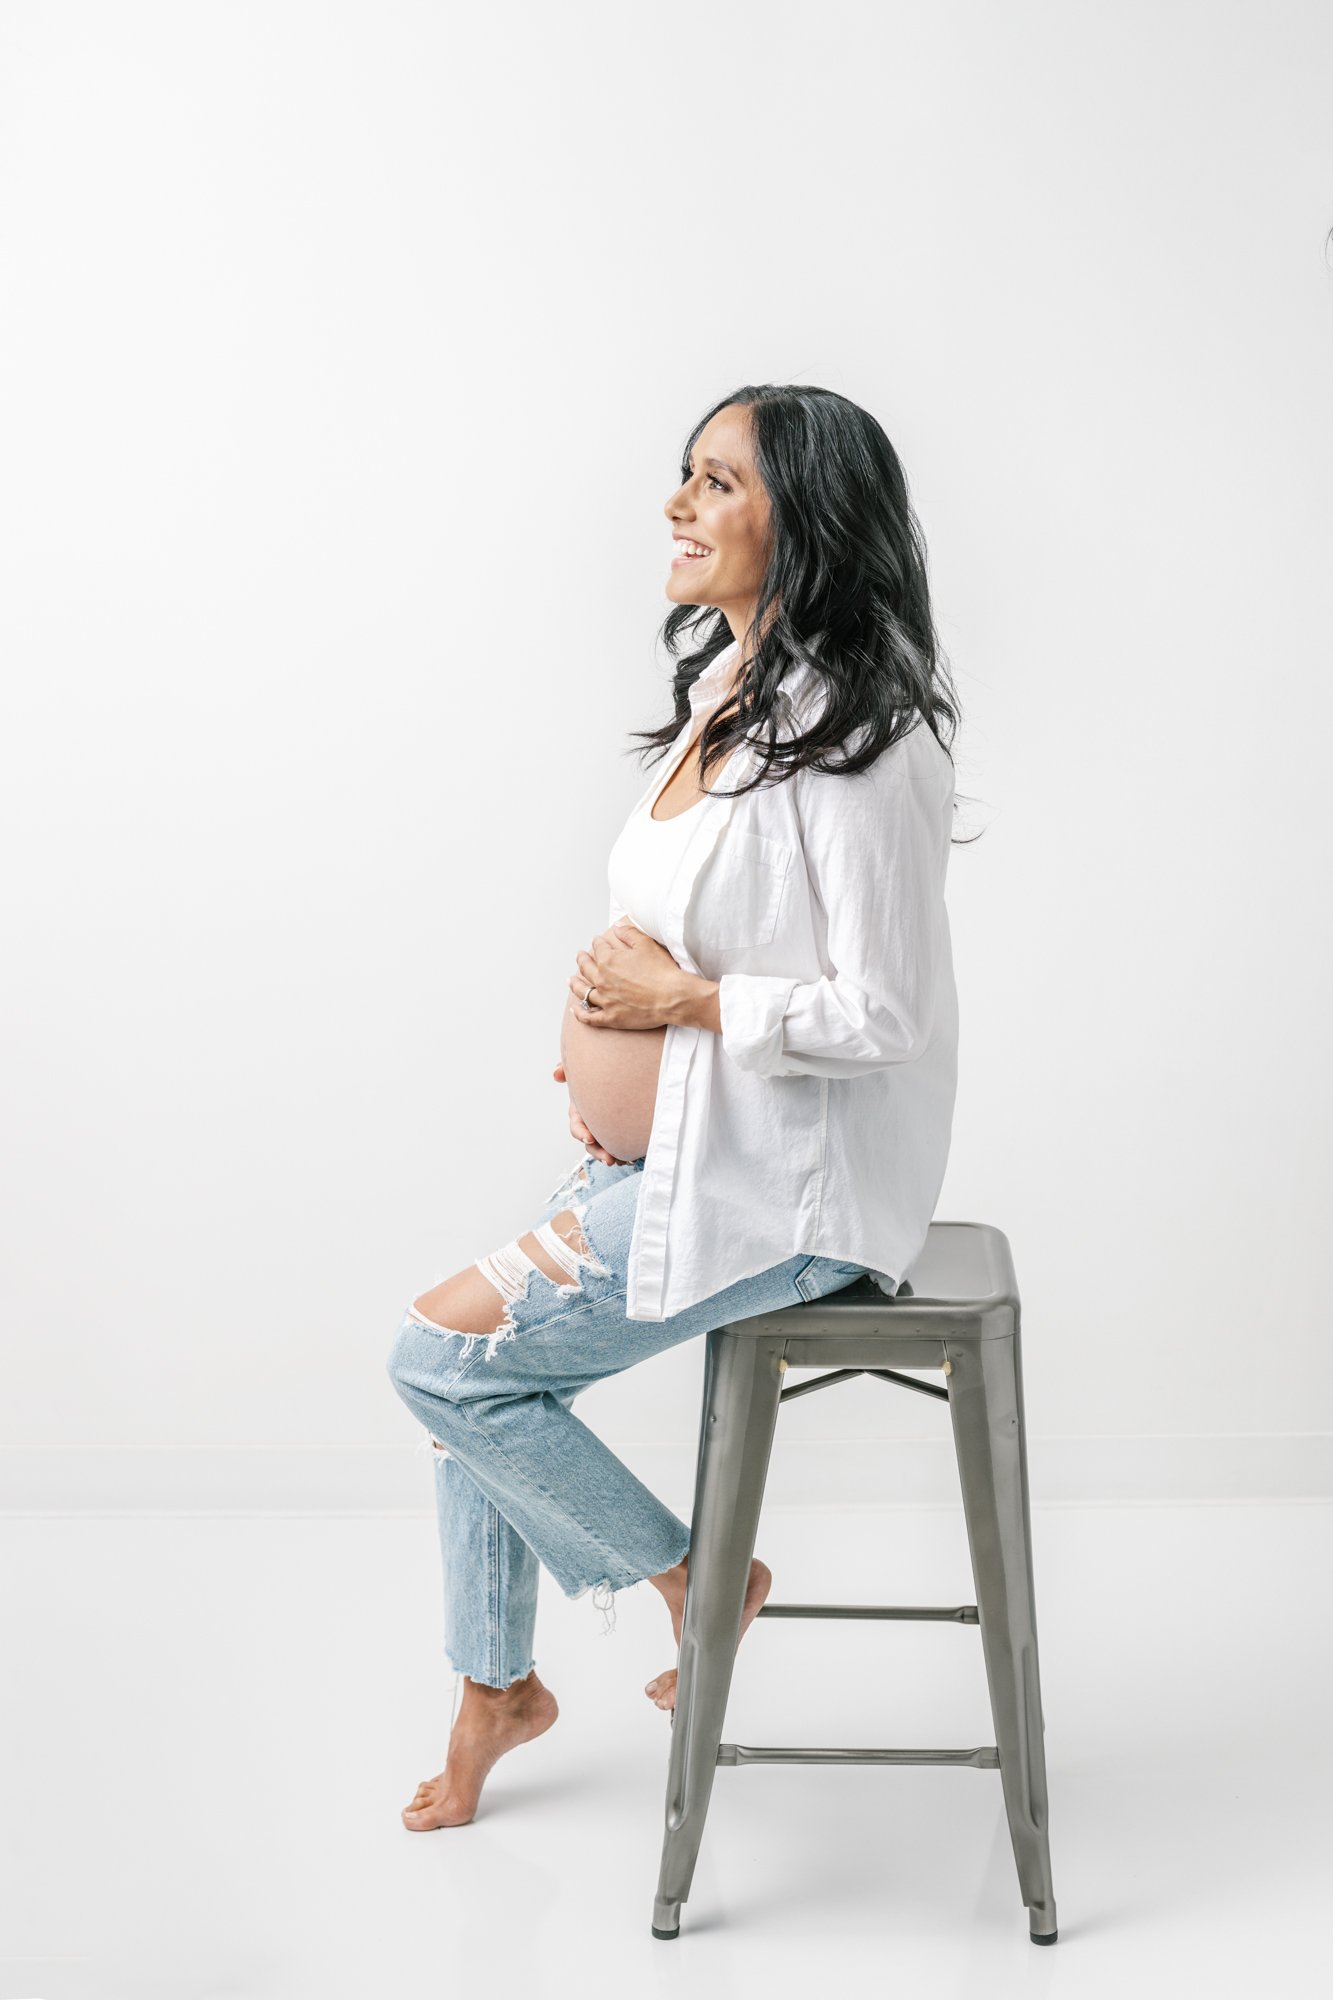  Pose inspiration for maternity photo sessions utilizing a bar stool for the pregnant mother to sit and rest while posing. #southorange #newjerseyphotographers #maternitysession #maternityposeinspo #studiophotography #formalmaternitystyle #casualmate